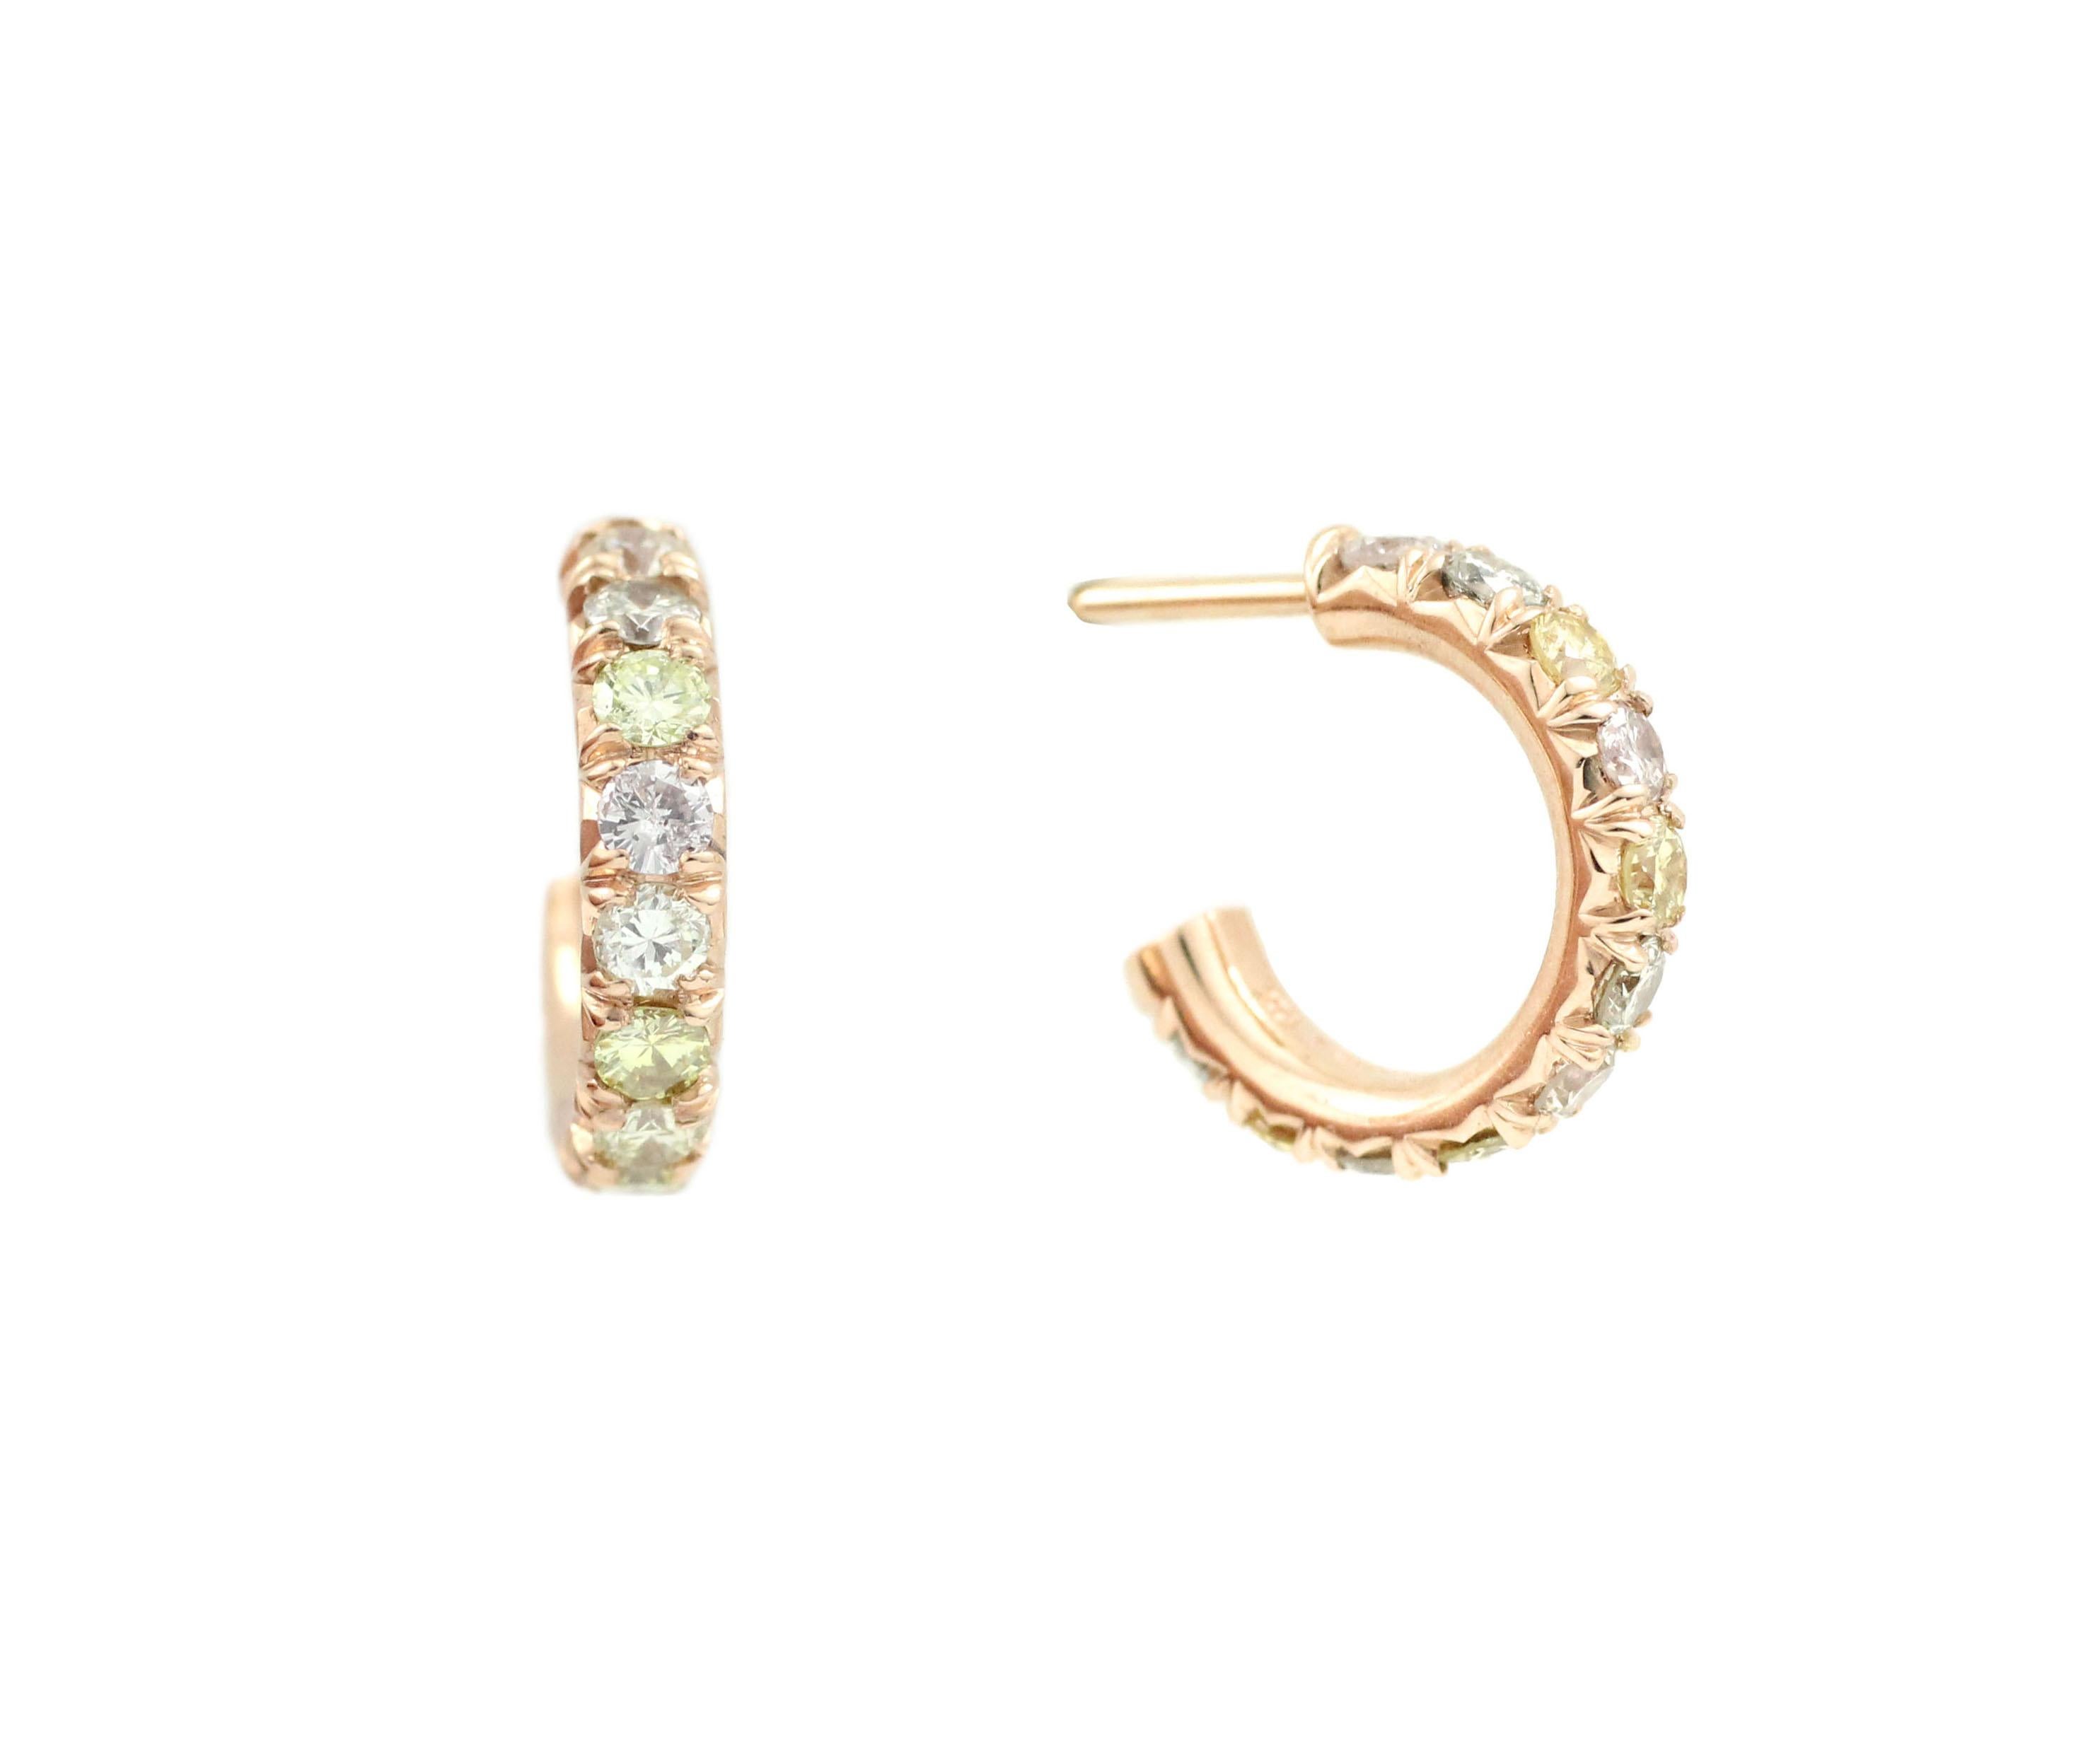 These hoop earrings contain 22 Natural Color, Brilliant Cut Diamonds (1.15 Cts.).   A beautiful, light color range of yellow, peach, gray and sand toned Diamonds are highlighted and complemented by the post-back, 18 Kt Rose Gold setttings. 